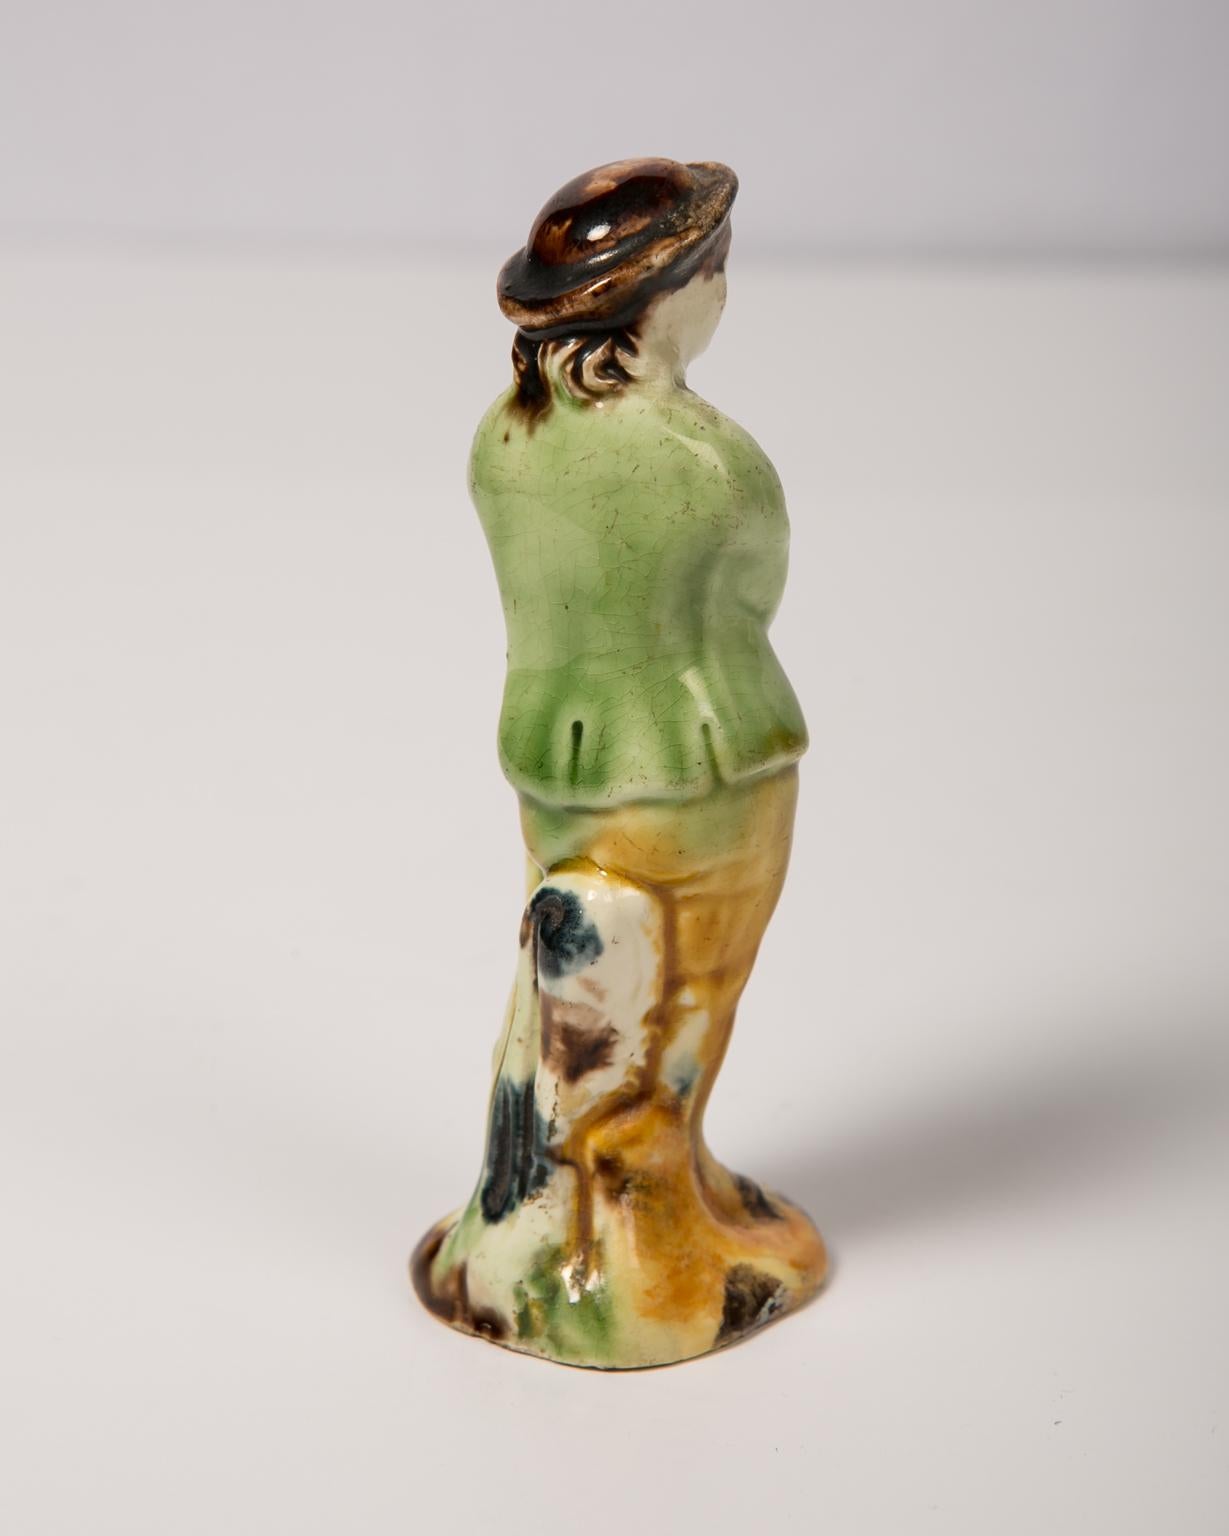 WHY WE LOVE IT: Sometimes, the smallest thing gives you the most pleasure.
We are pleased to offer this creamware figure of a young man. Made in 18th century England at some point, he became part of the collection of Colonial Williamsburg and was